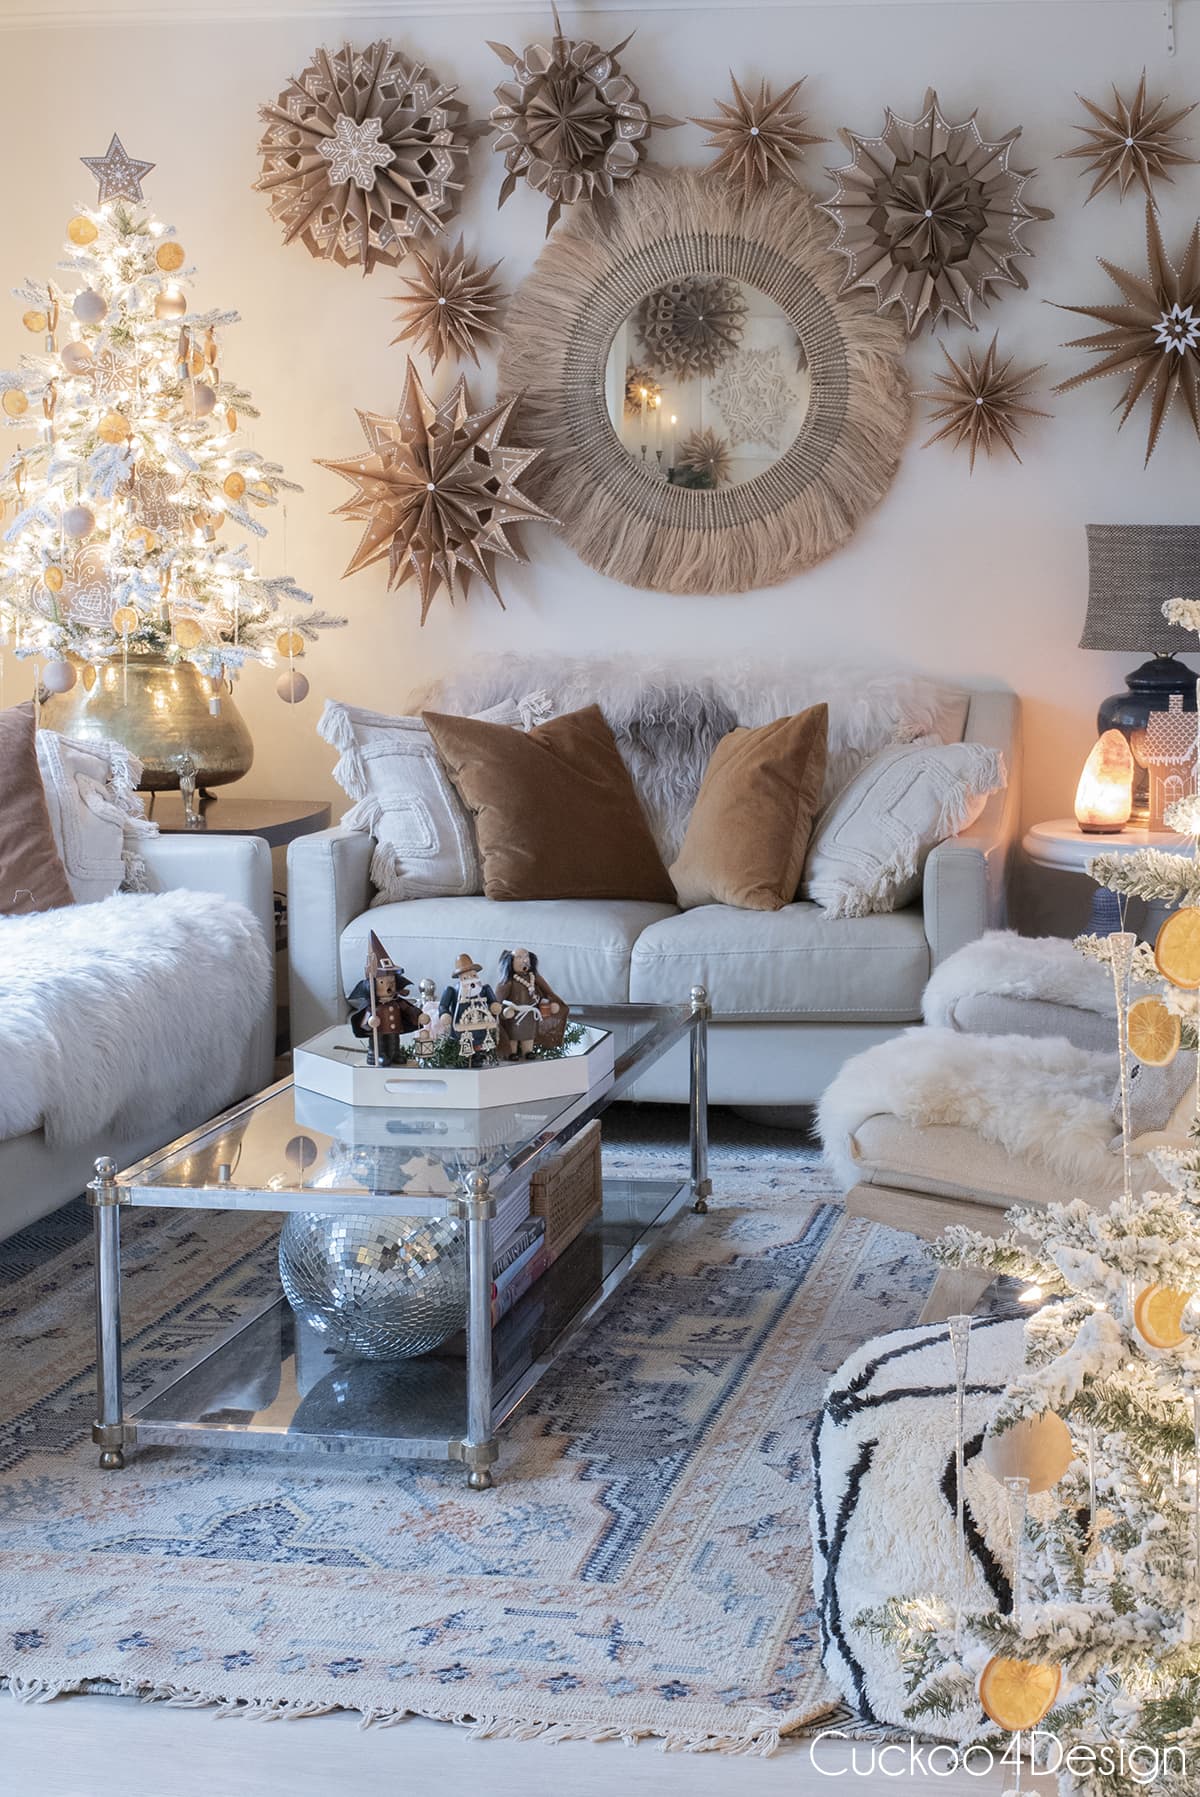 gingerbread snowflakes hanging above round mirror in living room